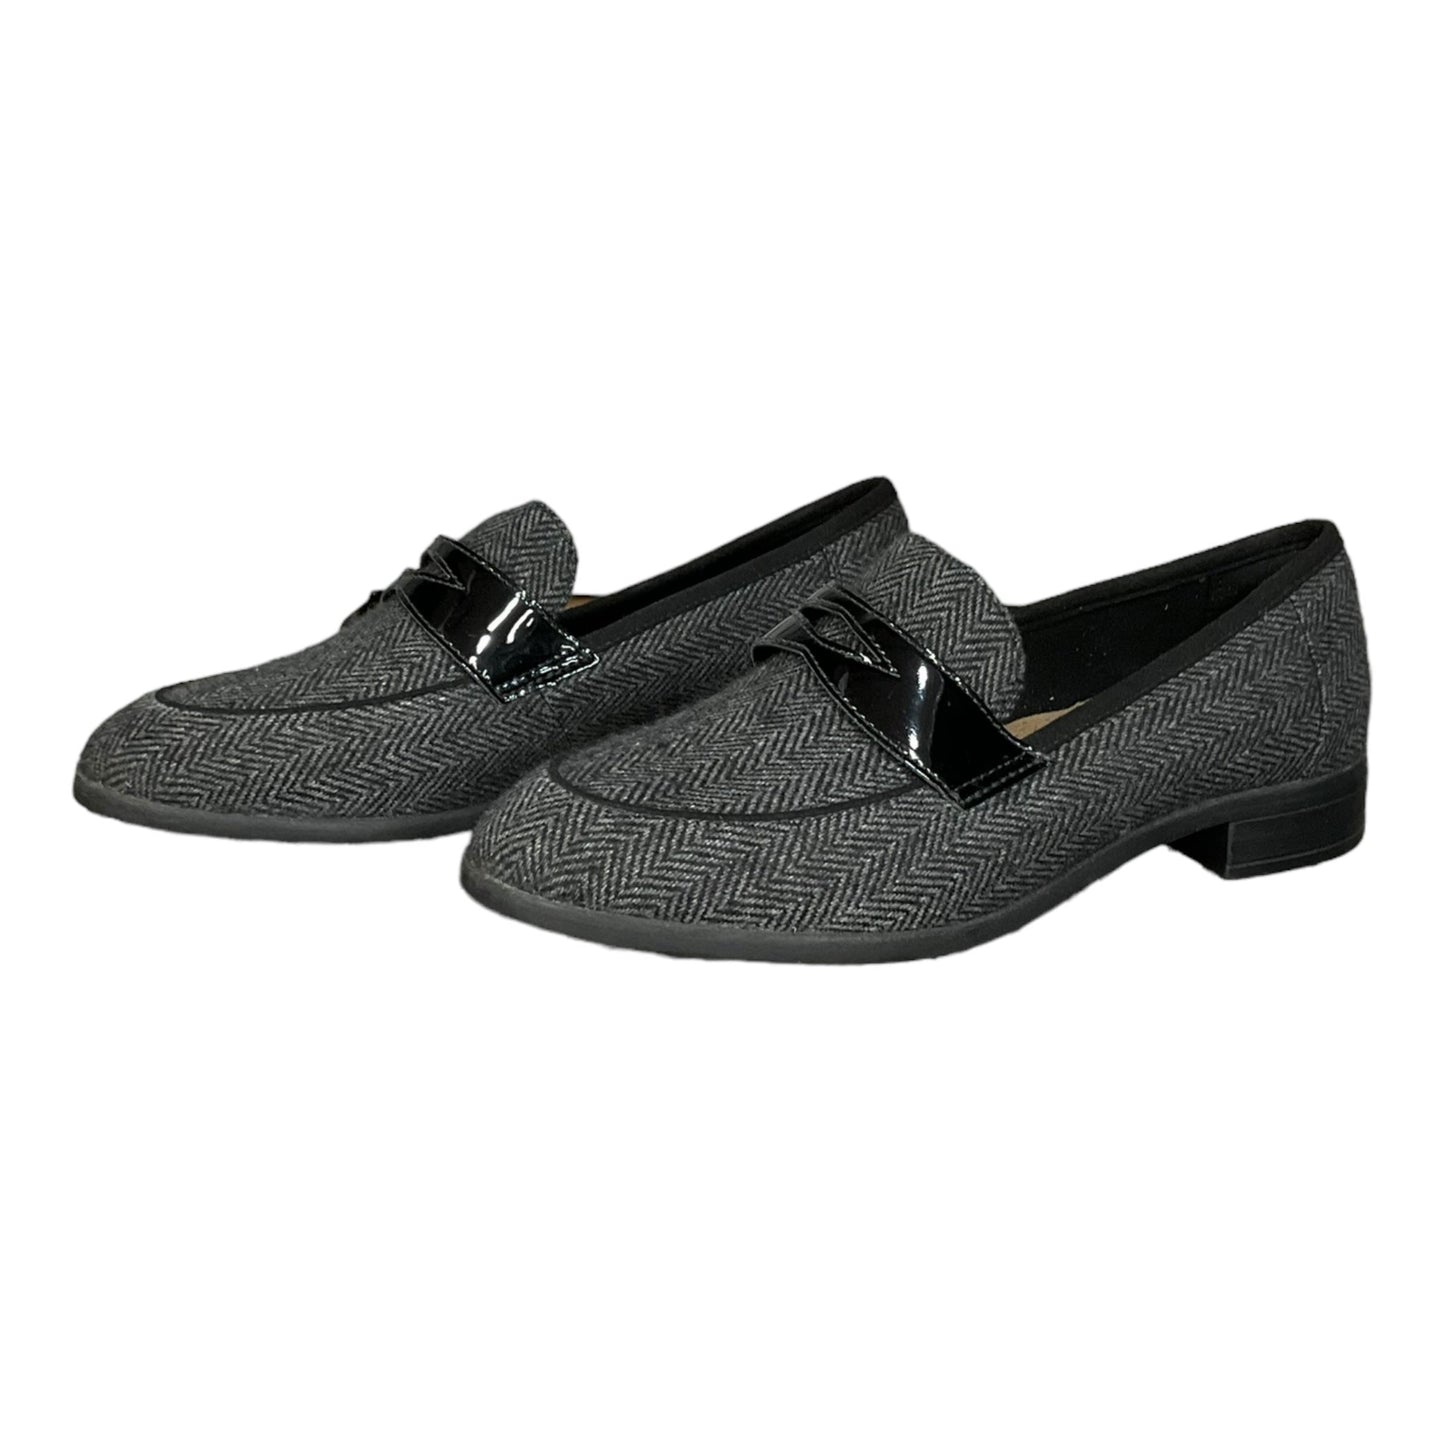 Grey Shoes Flats Clarks, Size 7.5